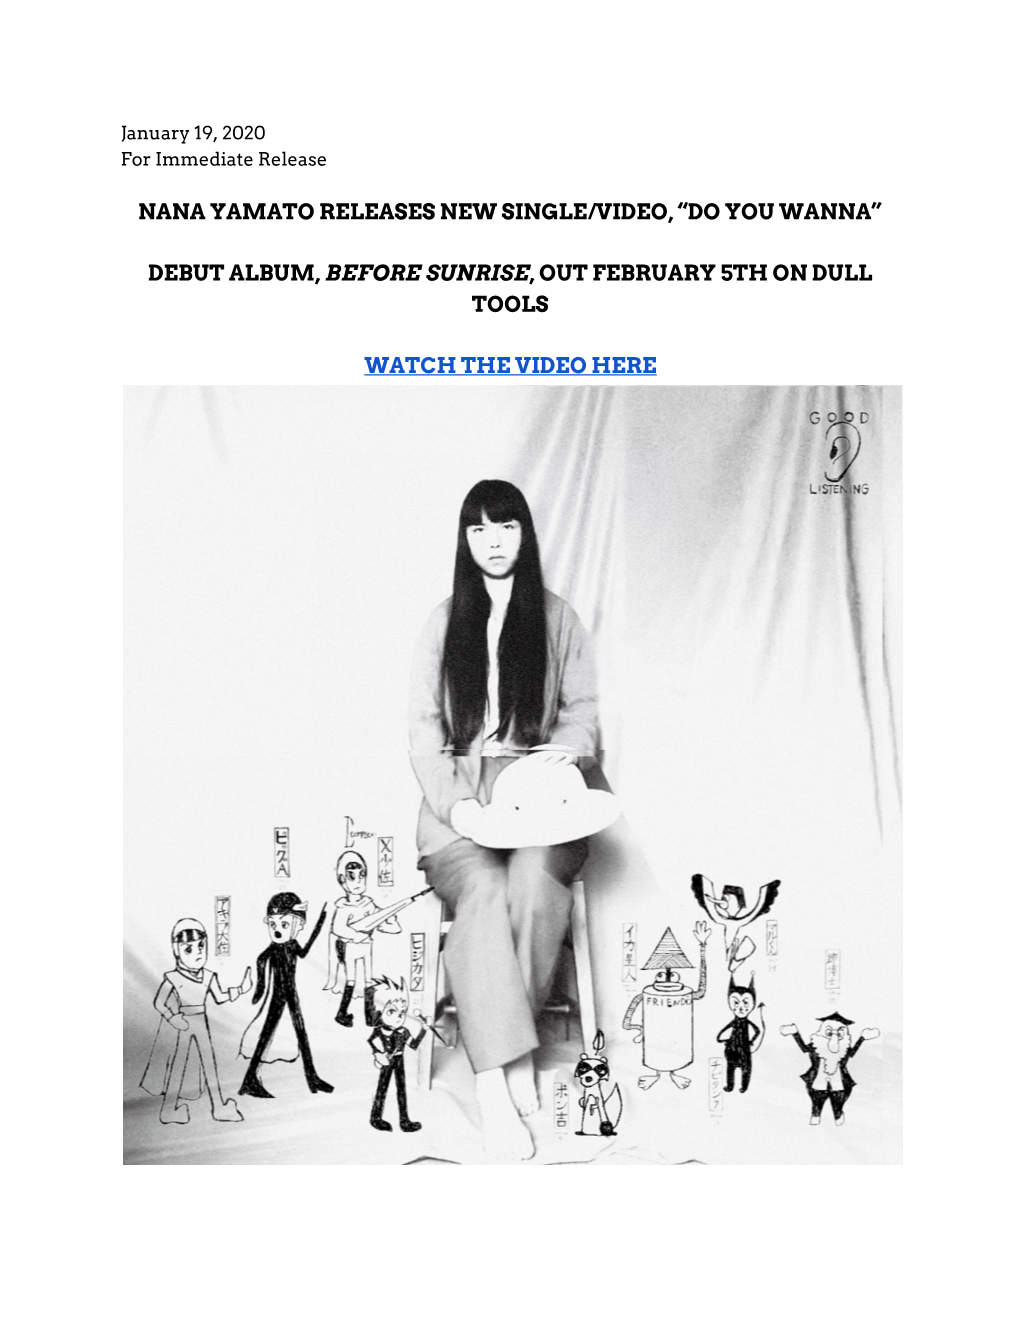 Nana Yamato Releases New Single/Video, “Do You Wanna” Debut Album, ​Before Sunrise​, out February 5Th on Dull Tools Watc